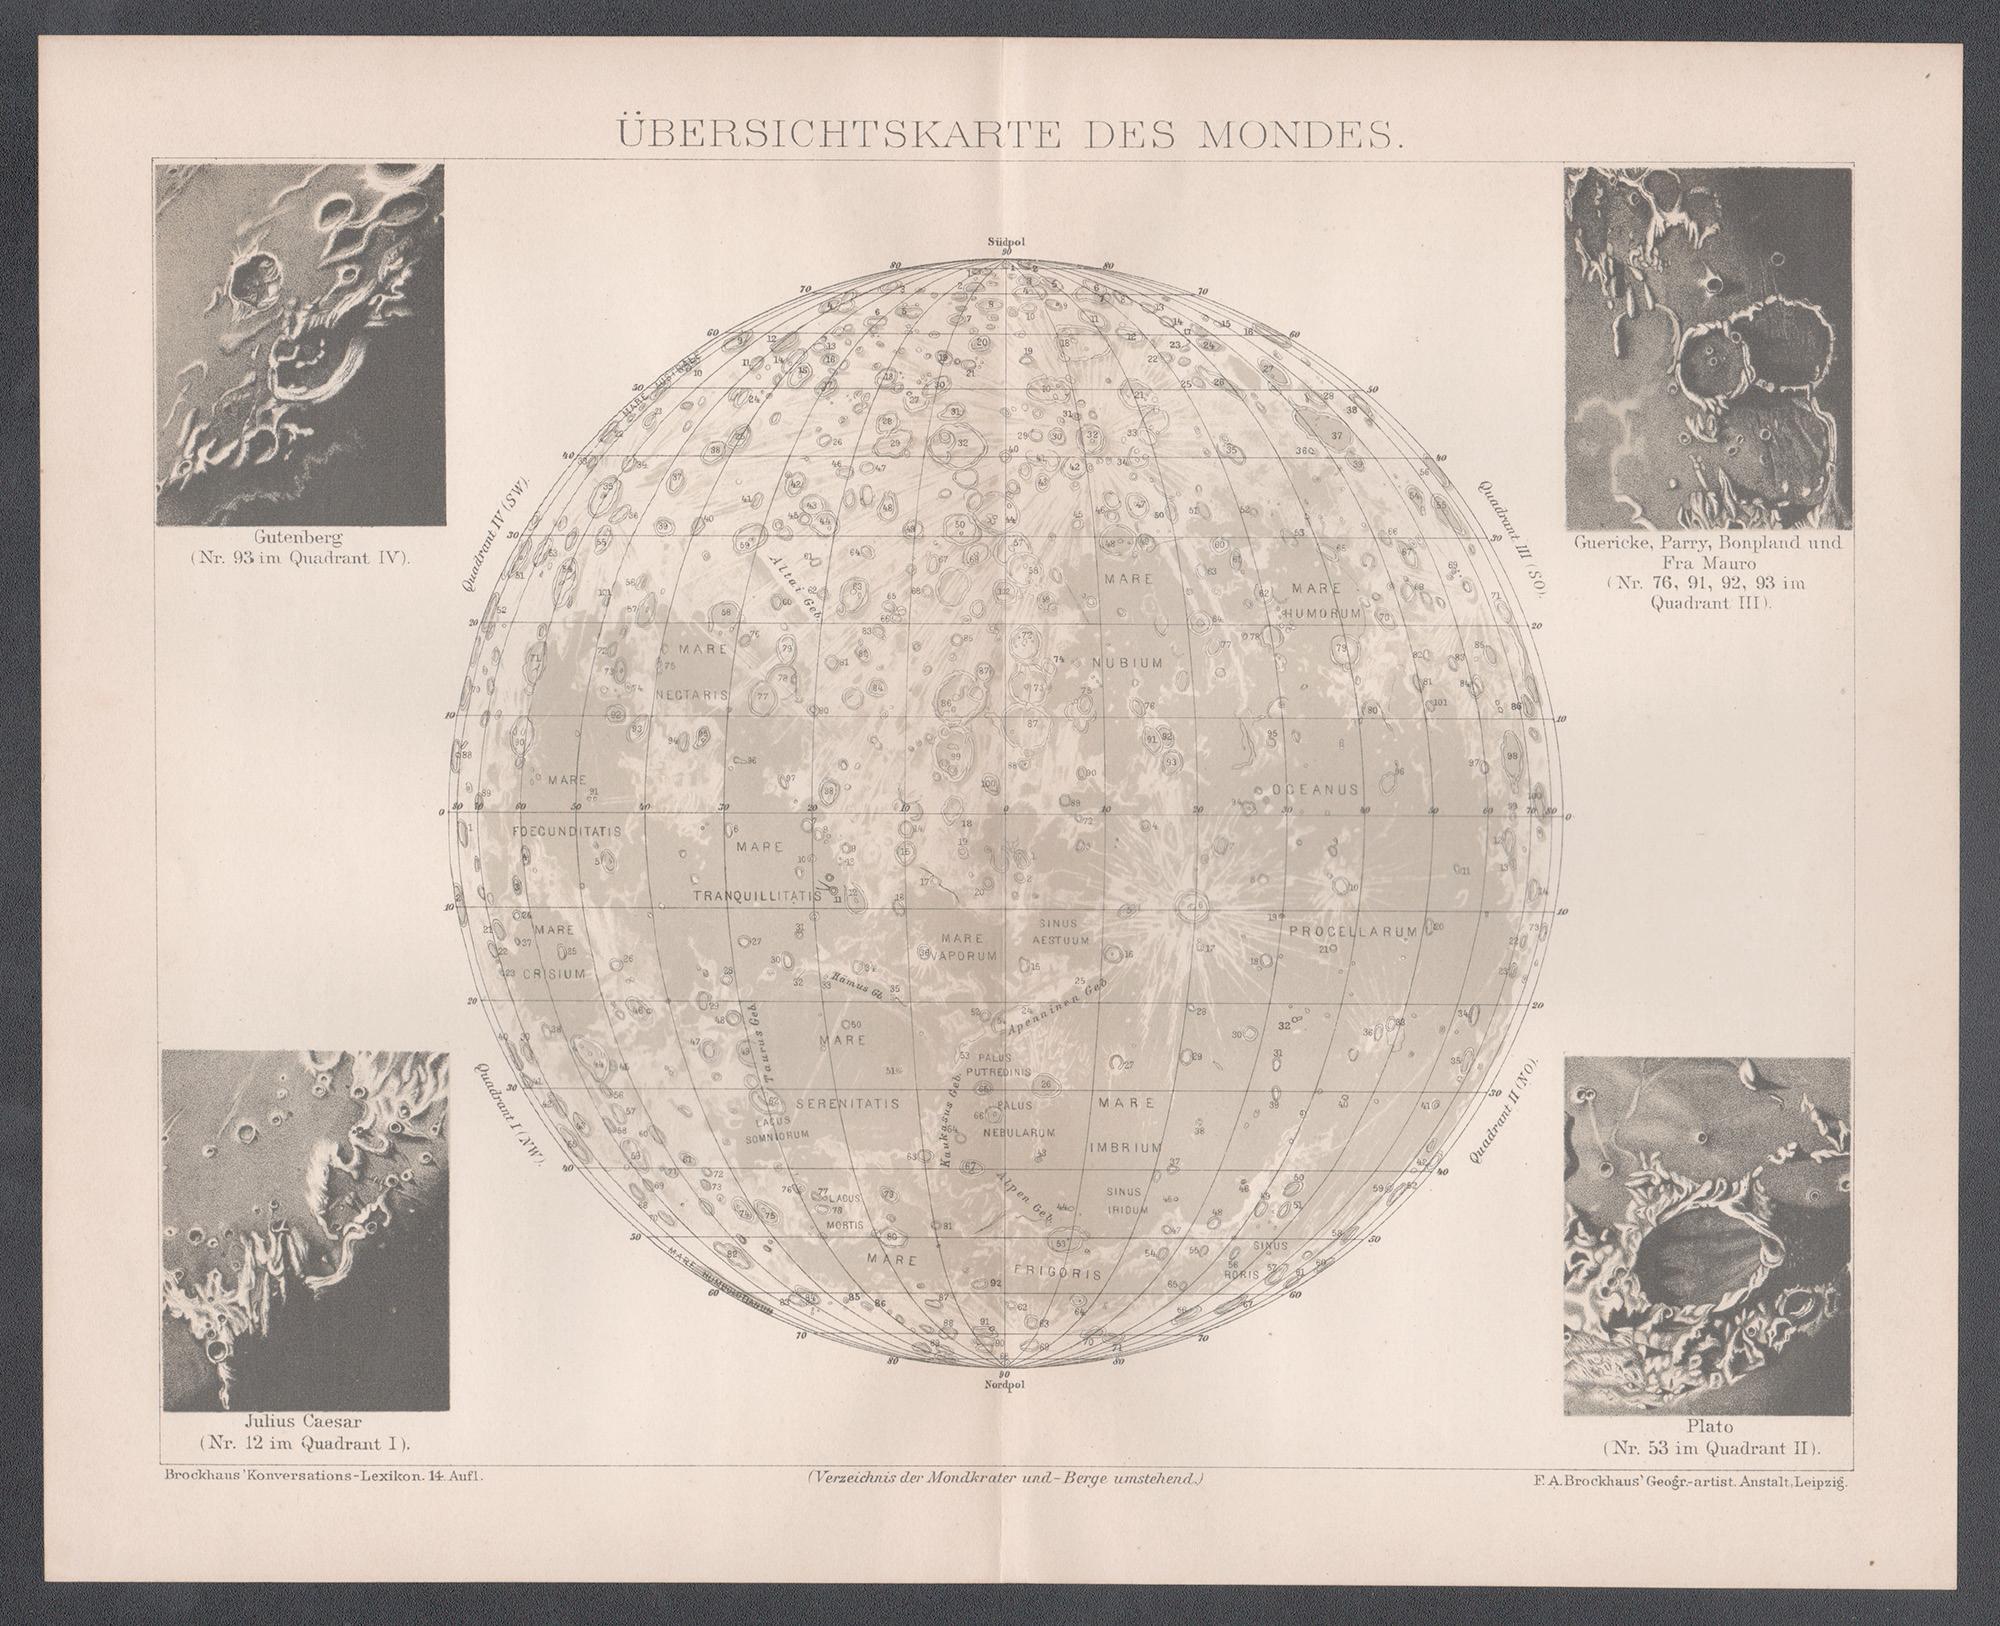 Ubersichtskarte Des Mondes (Overview Map of the Moon), antique astronomy print - Print by Unknown